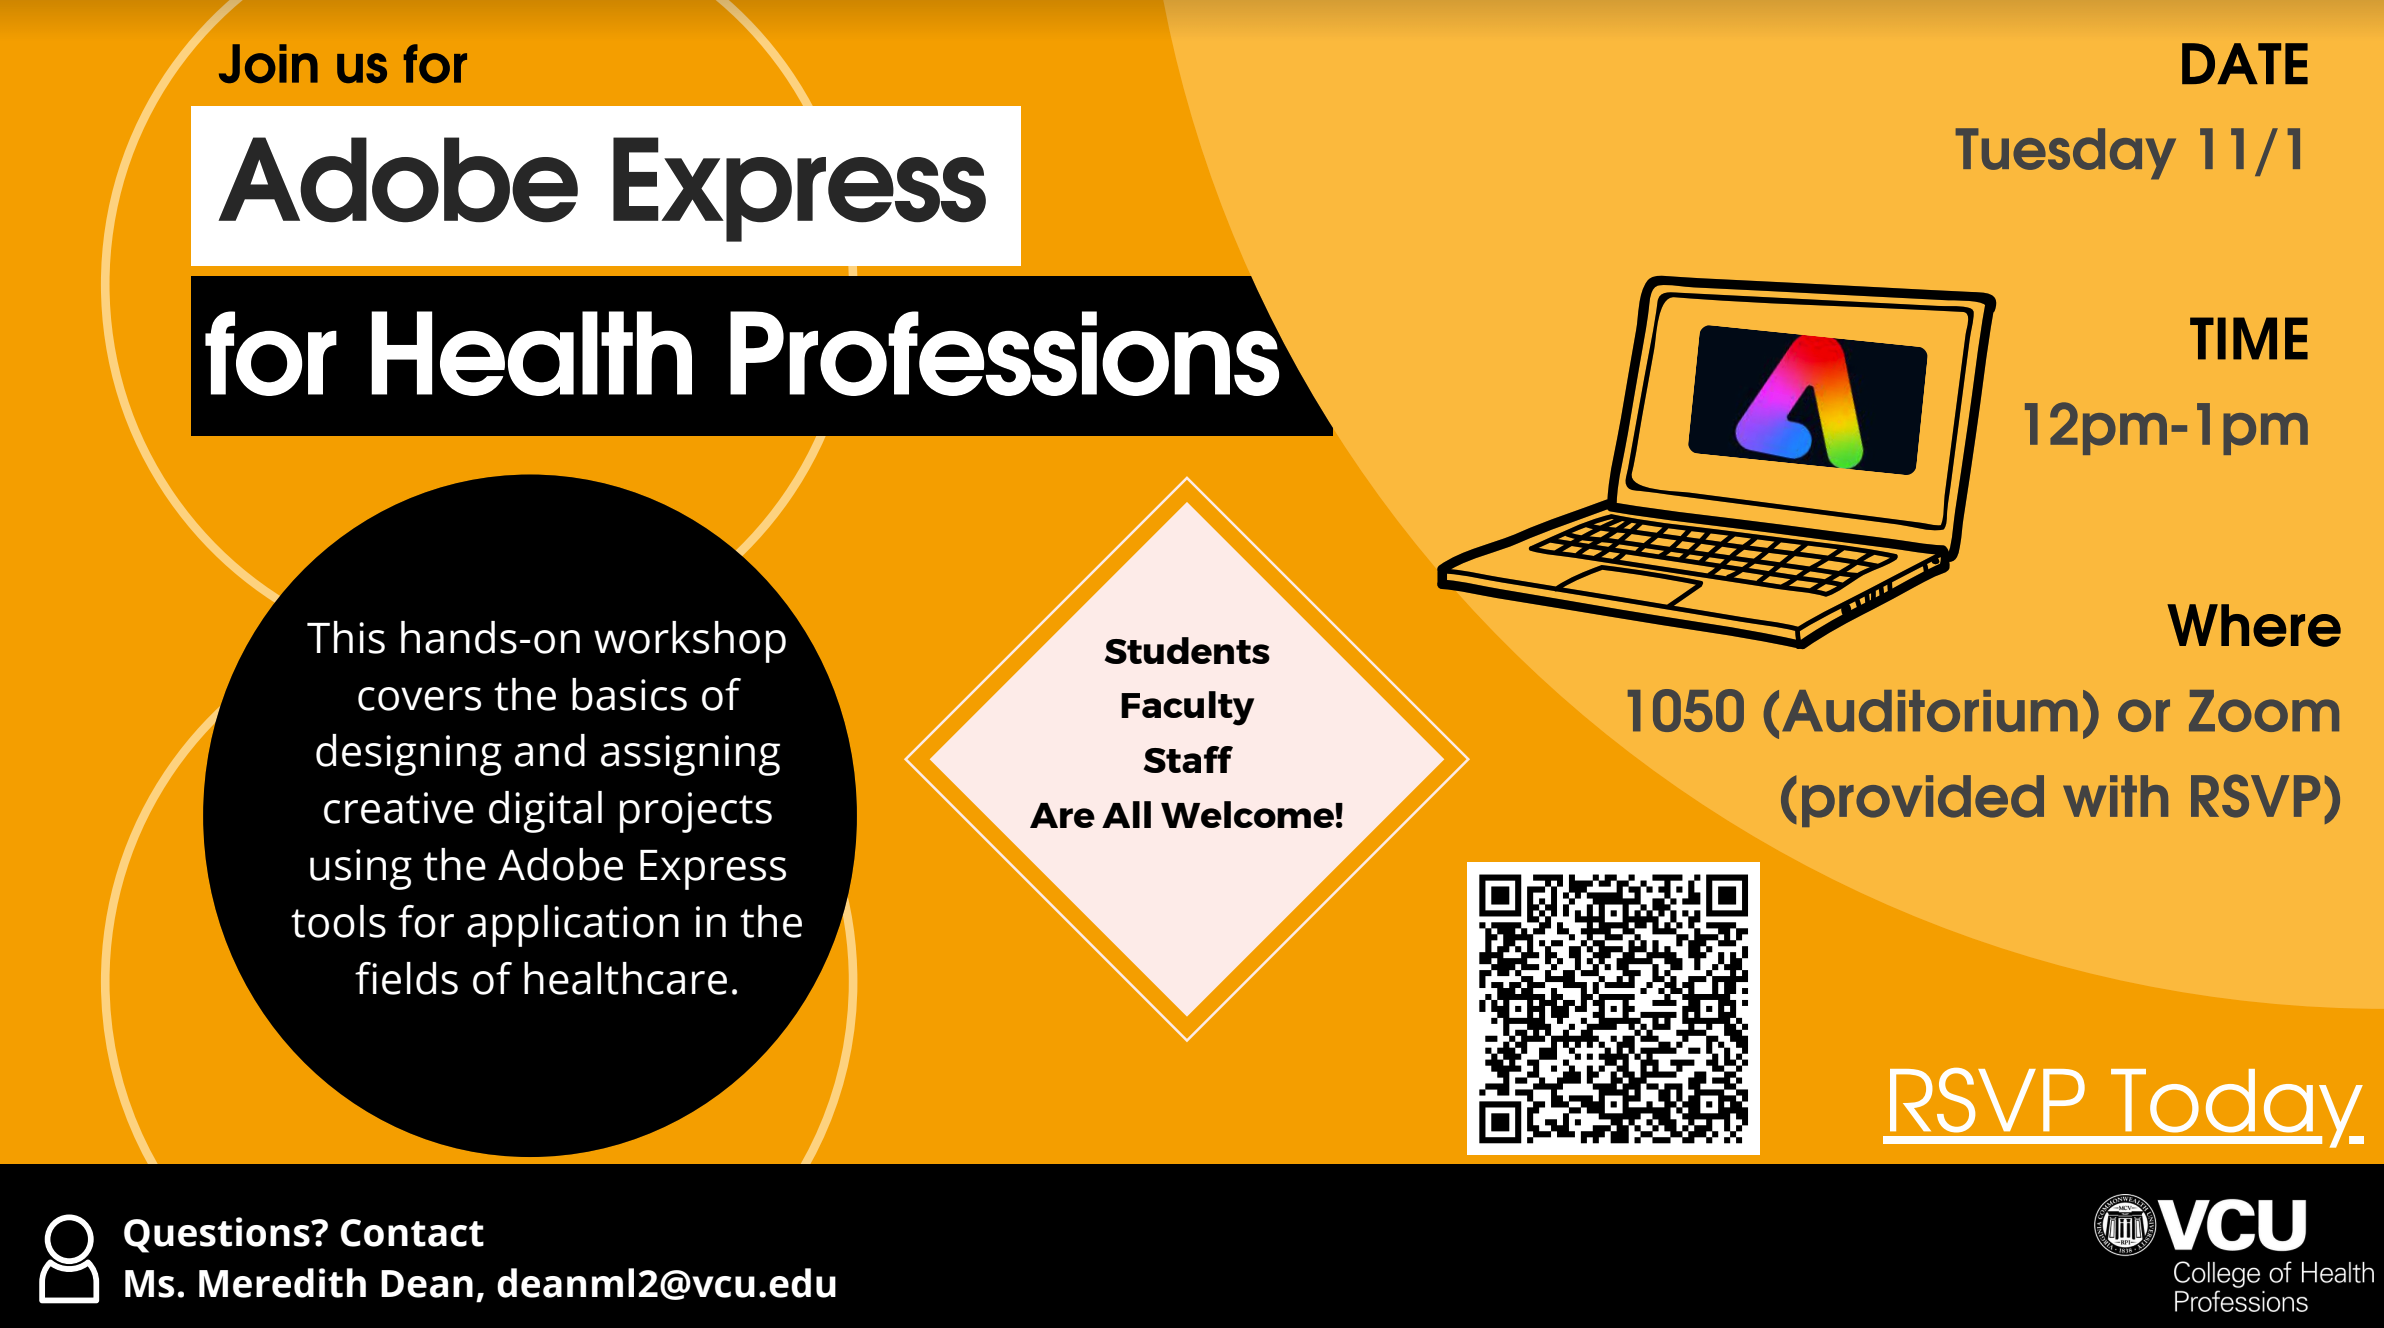 Join us for Adobe Express for Health Professionals, Tuesday November 1 12:00-1:00pm in 1050 Auditorium. Contact Meredith Dean at deanml2@vcu.edu if you have questions